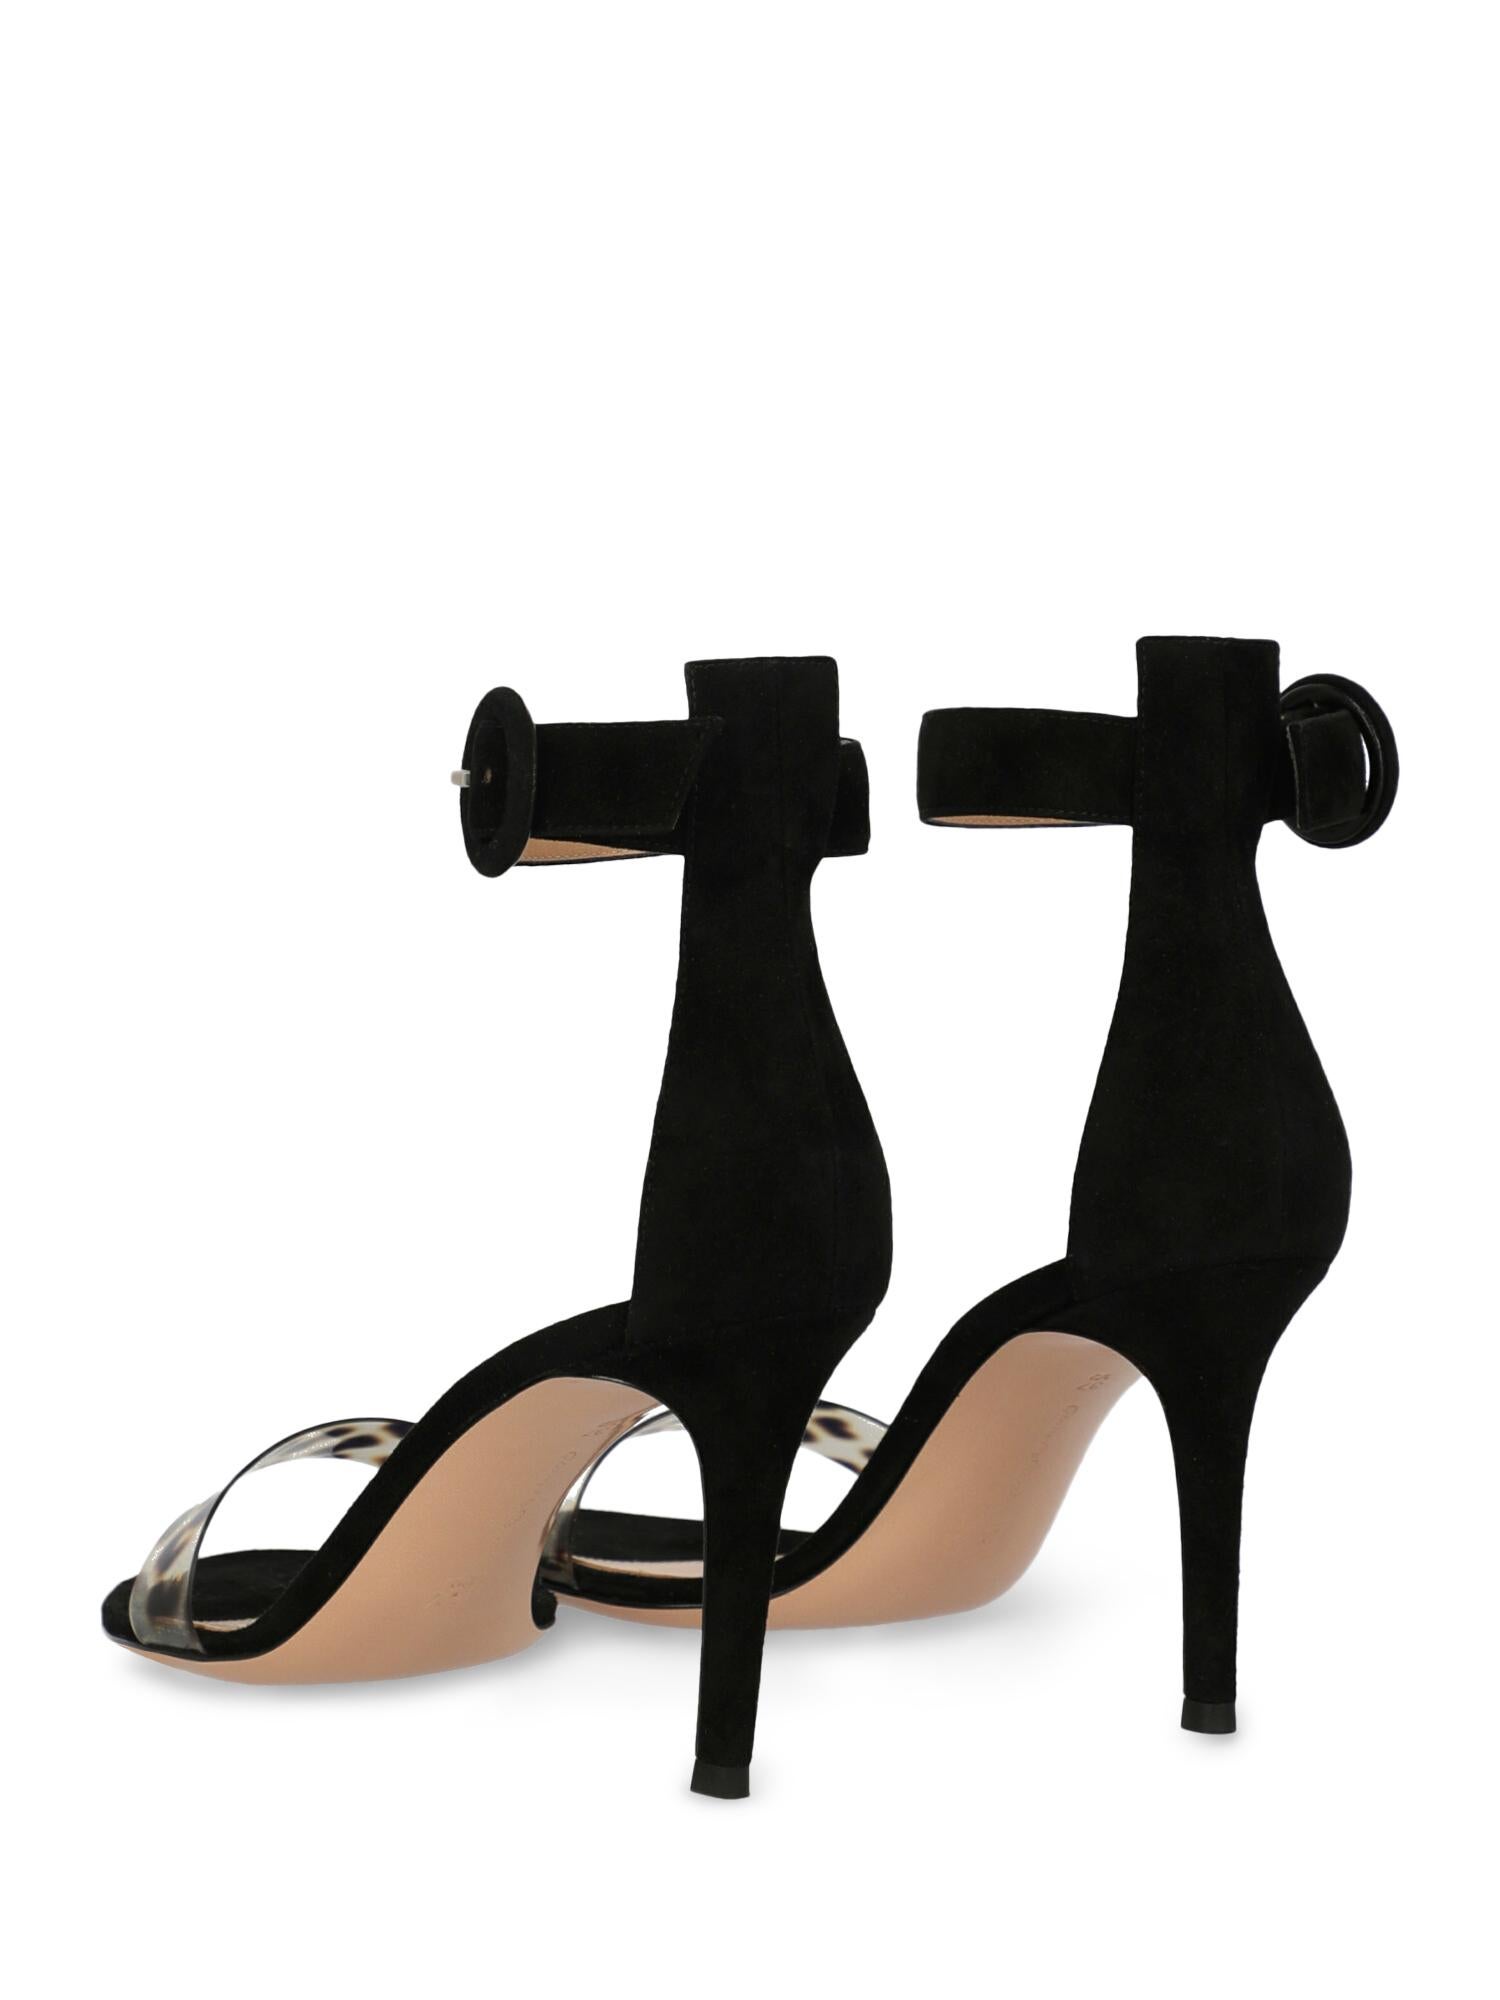 Gianvito Rossi Woman Sandals Black EU 37.5 In Excellent Condition For Sale In Milan, IT